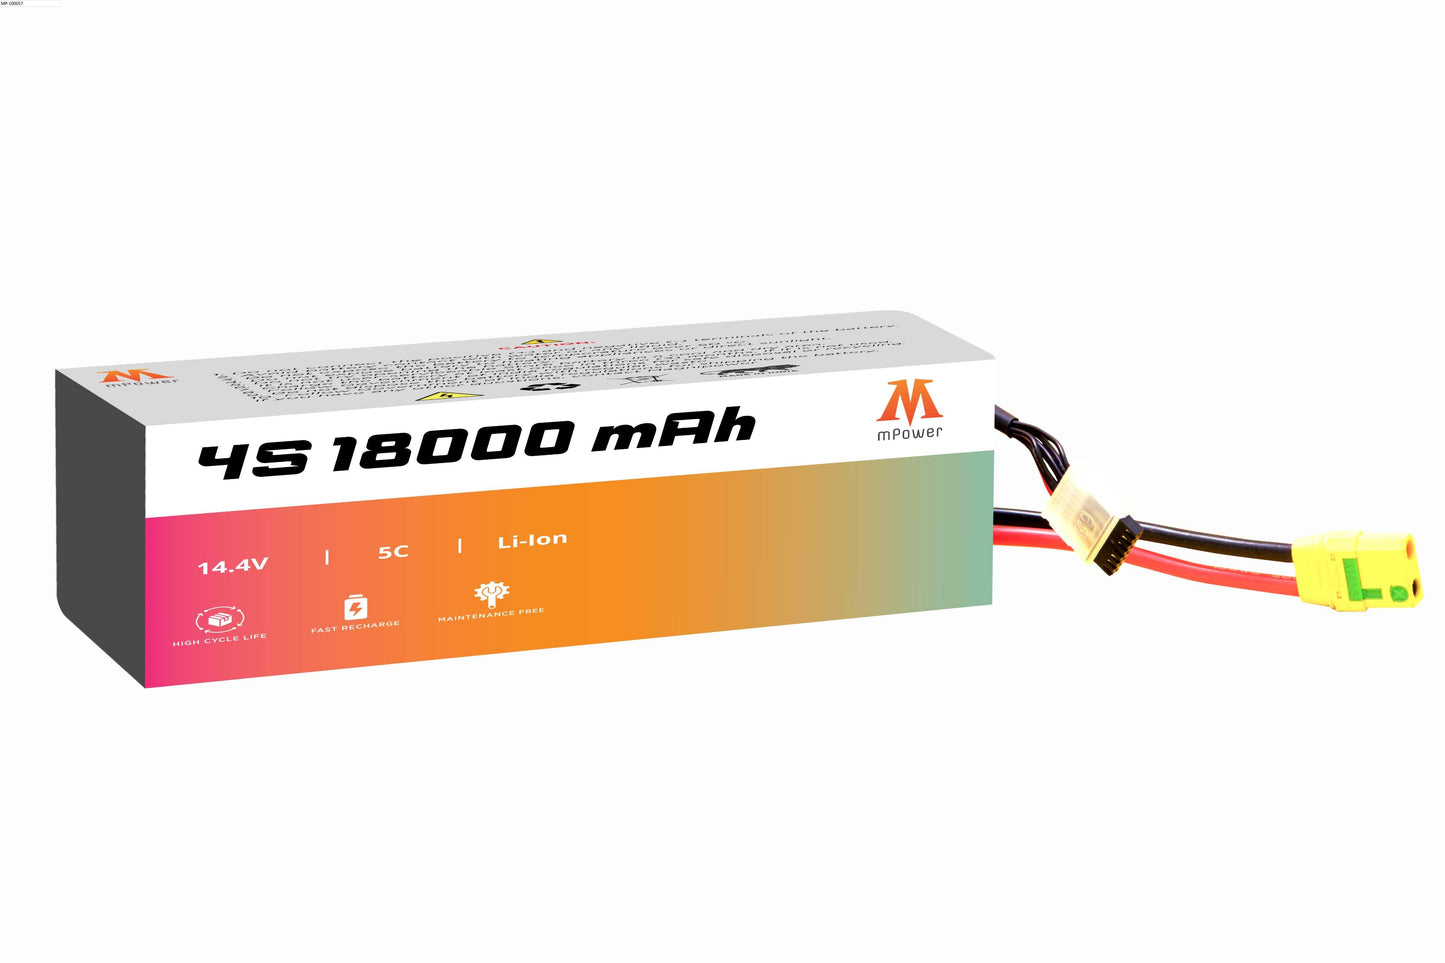 mPower 4S 18000mAh Lithium-Ion Battery for Survey Drones